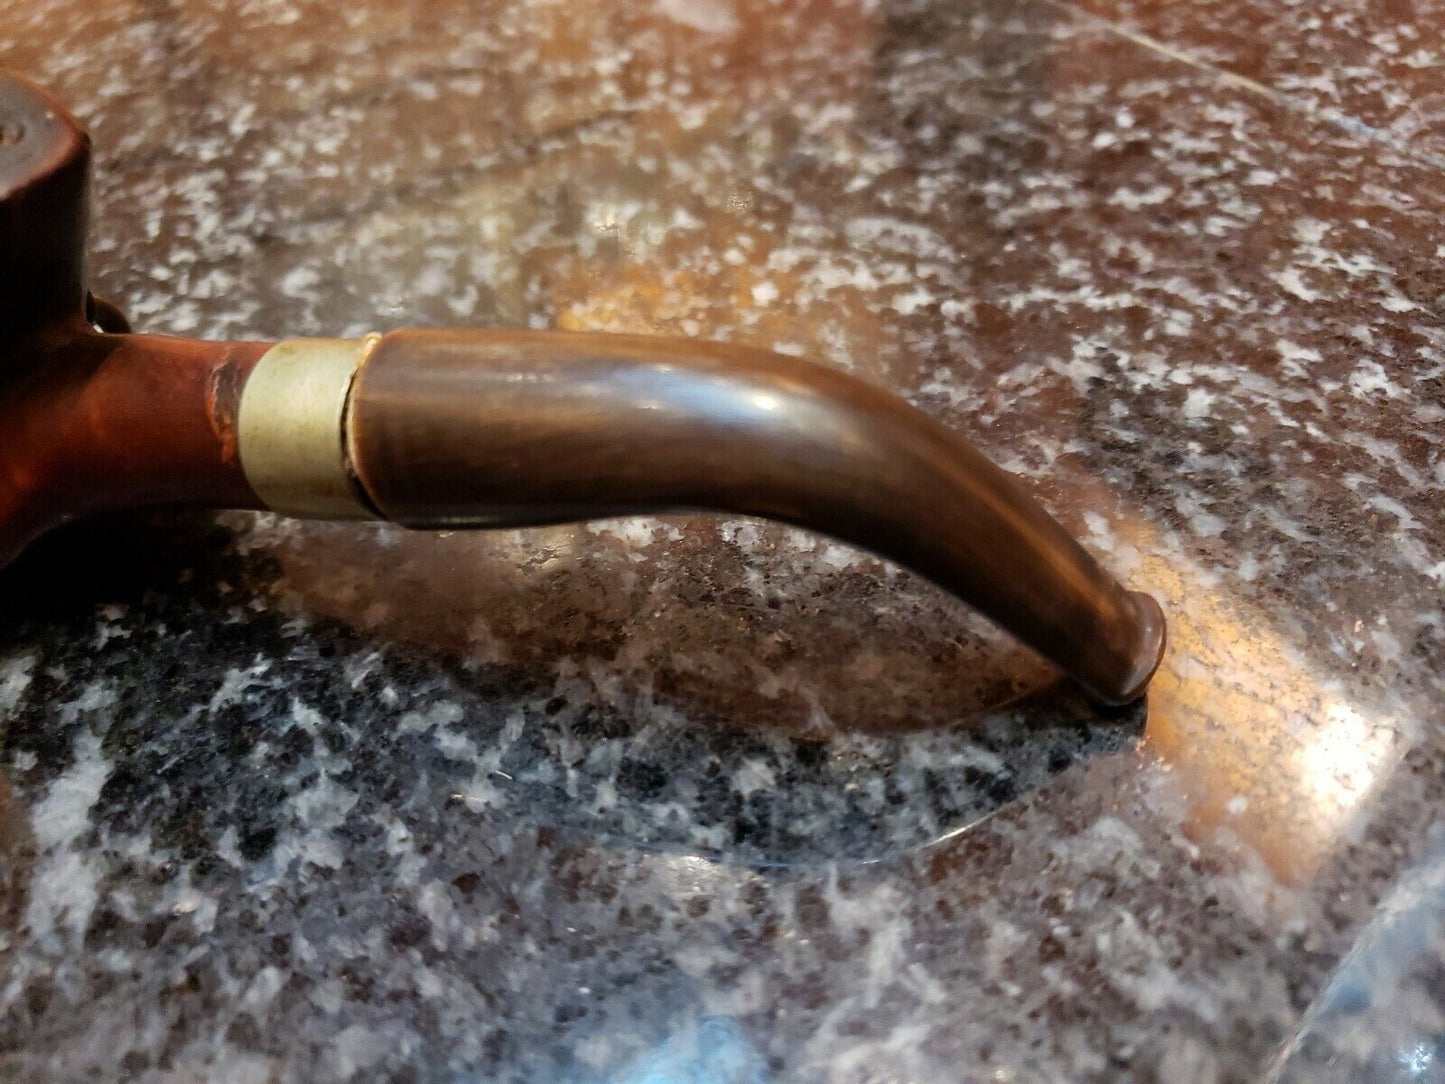 Cherry smoking pipe old french woman 5.75" approximately early 1900's hand made